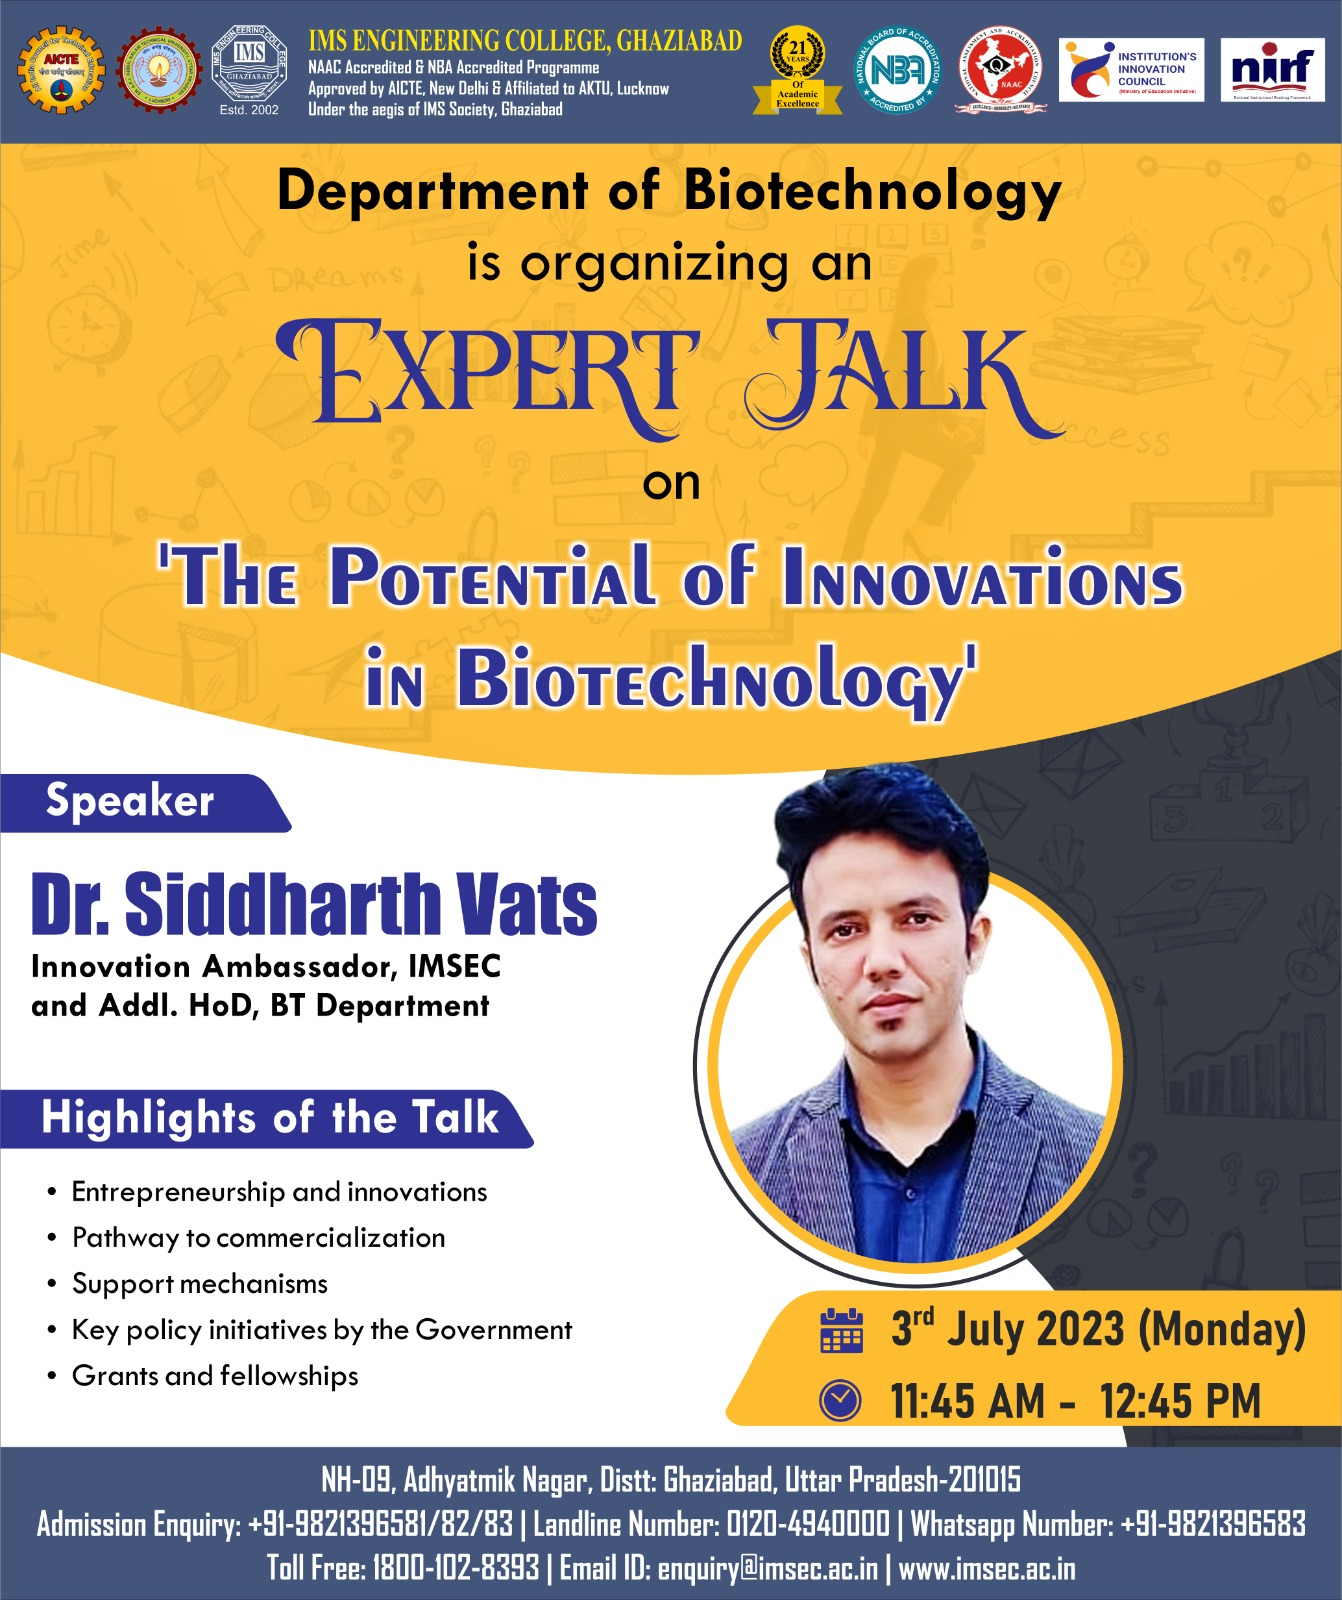 Expert talk on Potential of Innovations in Biotechnology